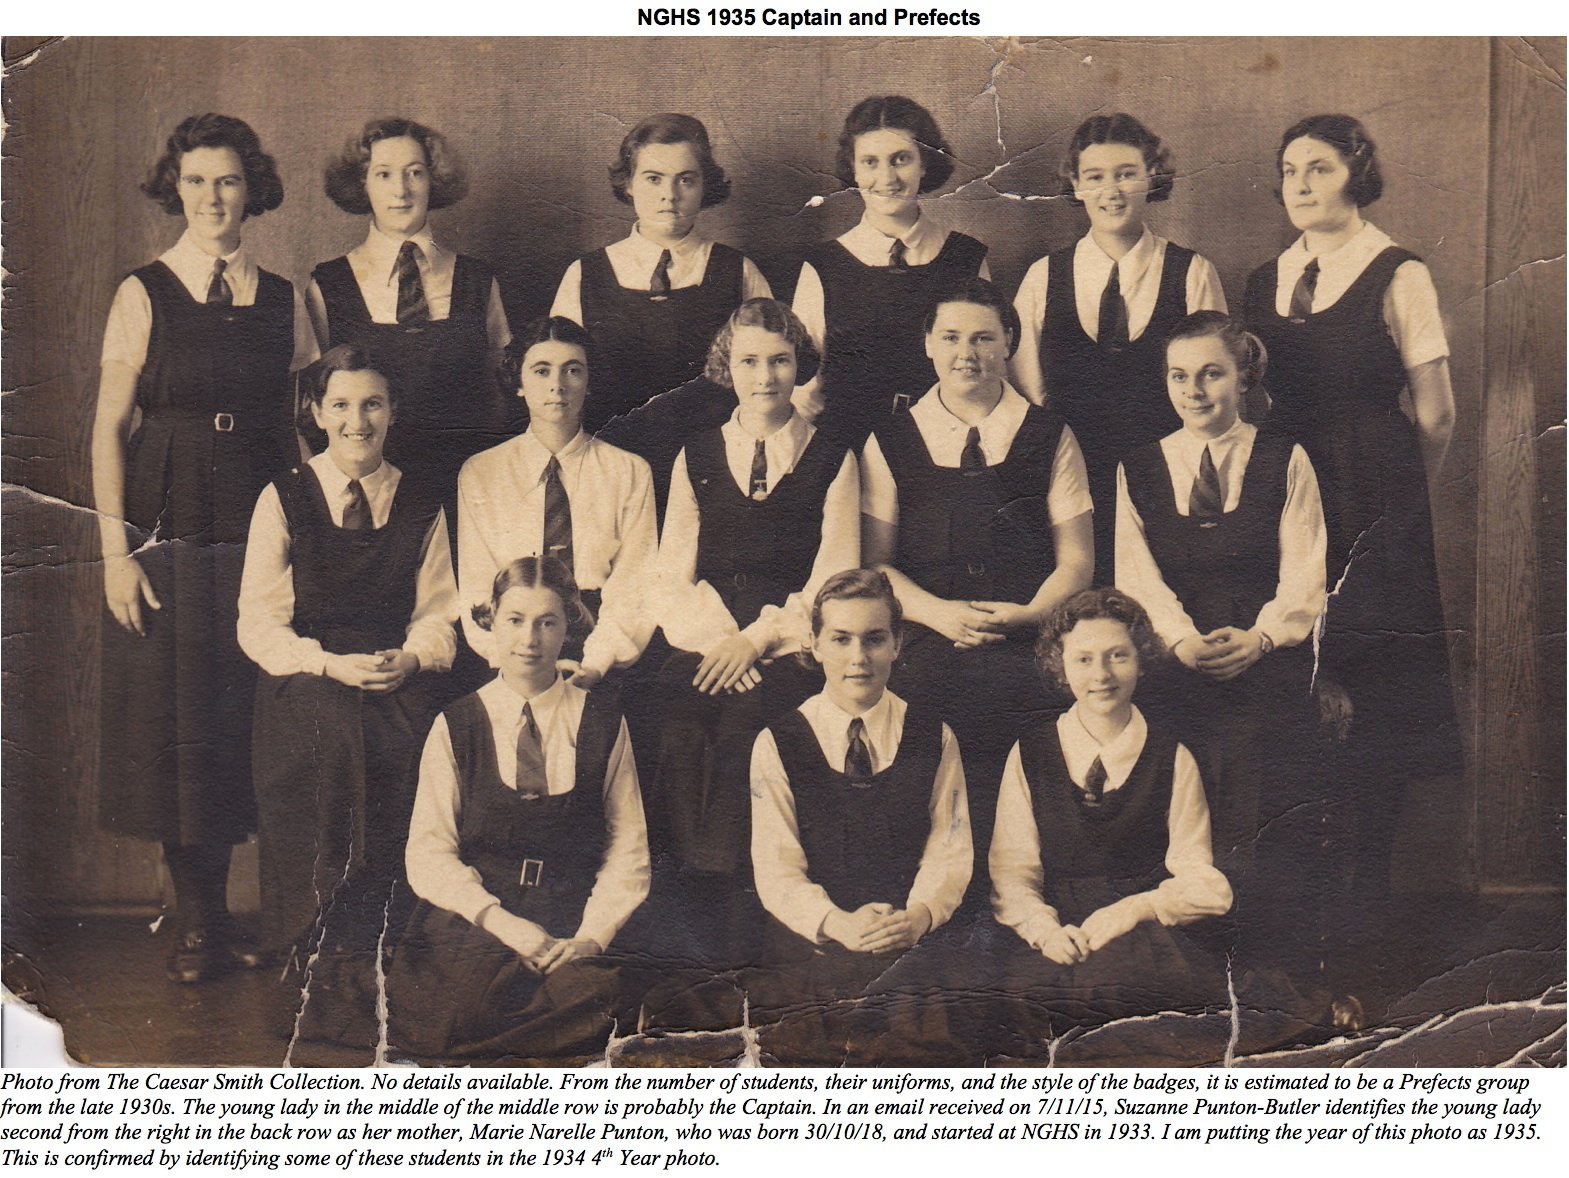 NGHS 1935 Captain and Prefects